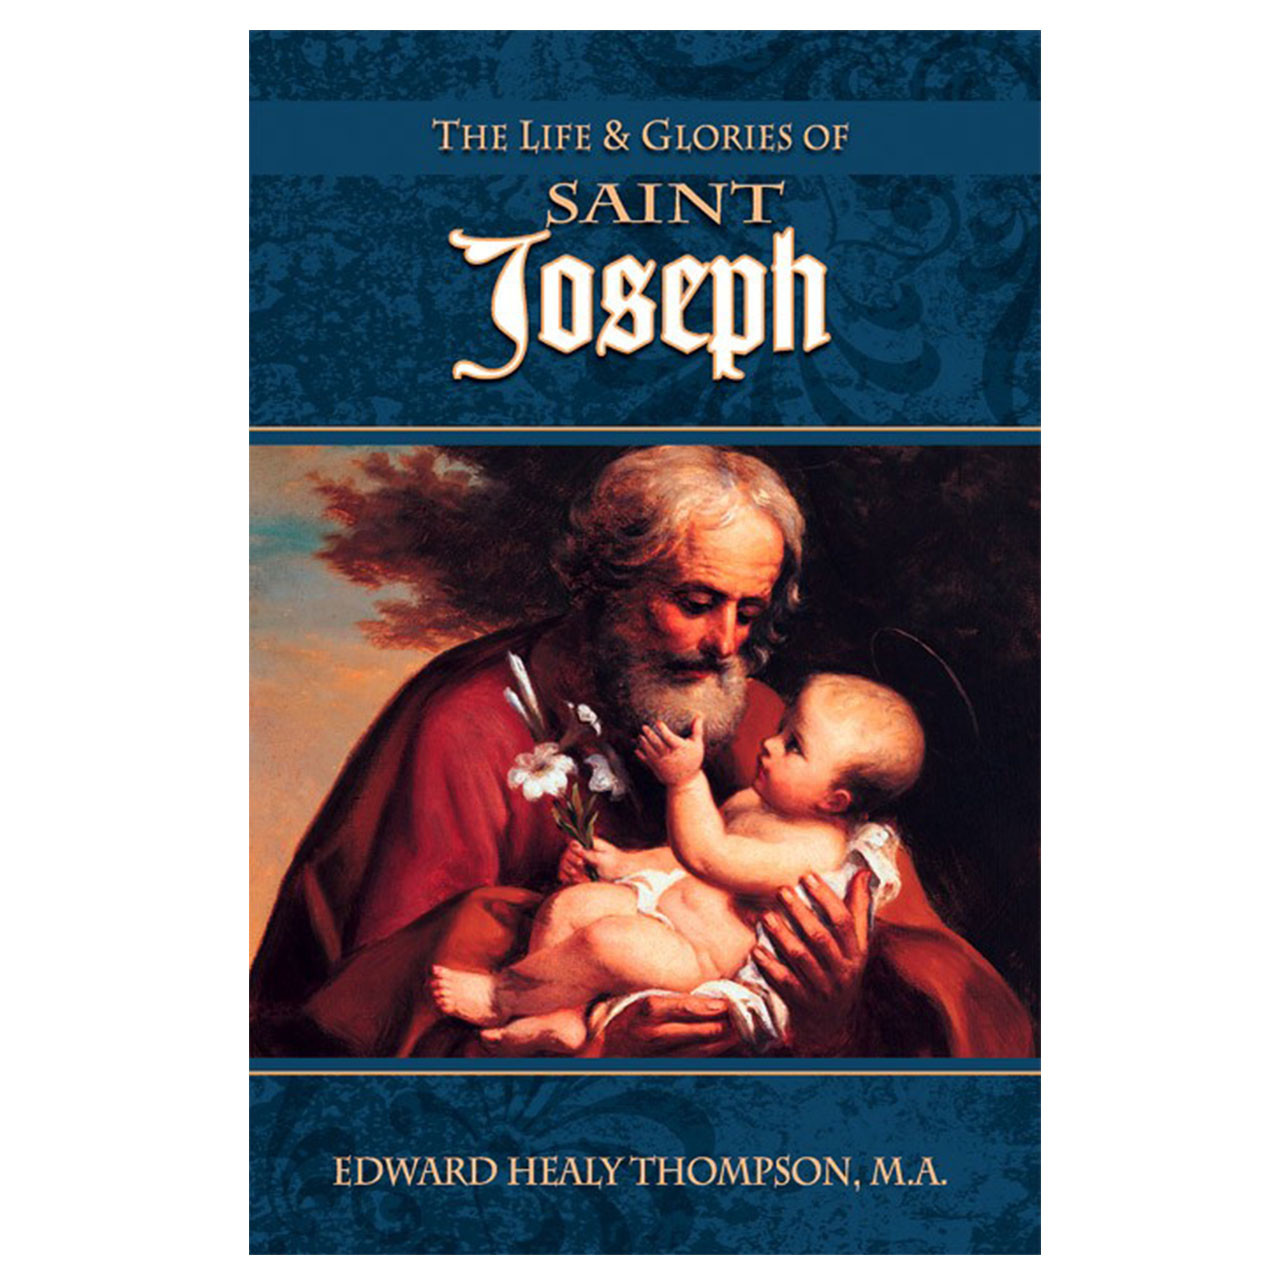 The Life and Glories of St. Joseph by Edward Healy Thompson, MA